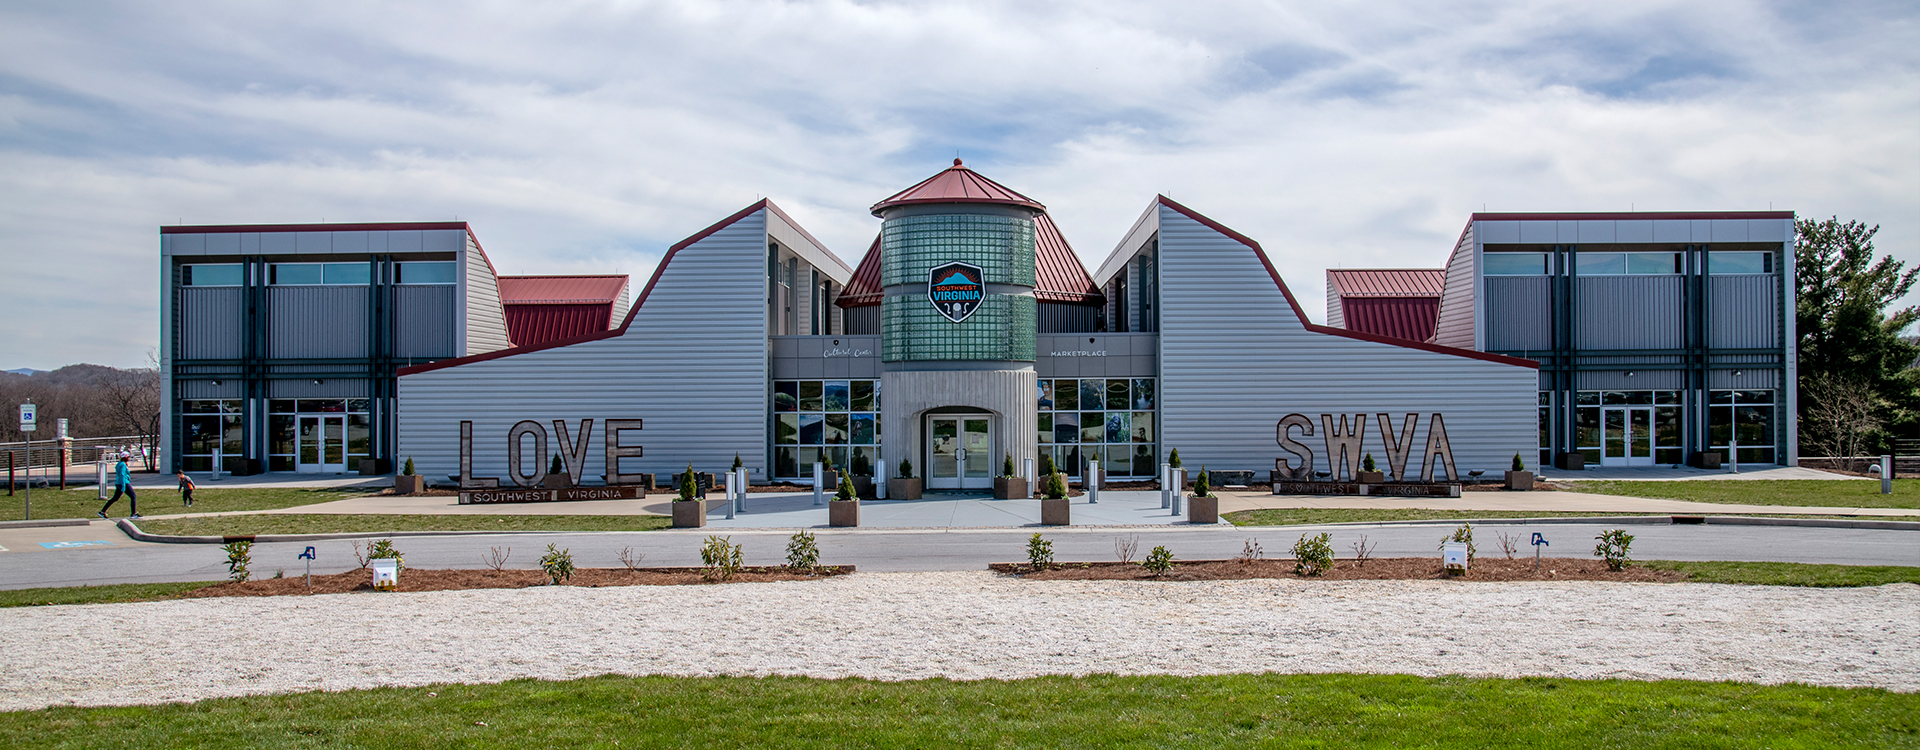 Exterior picture of the Southwest Virginia Cultural Center & Marketplace